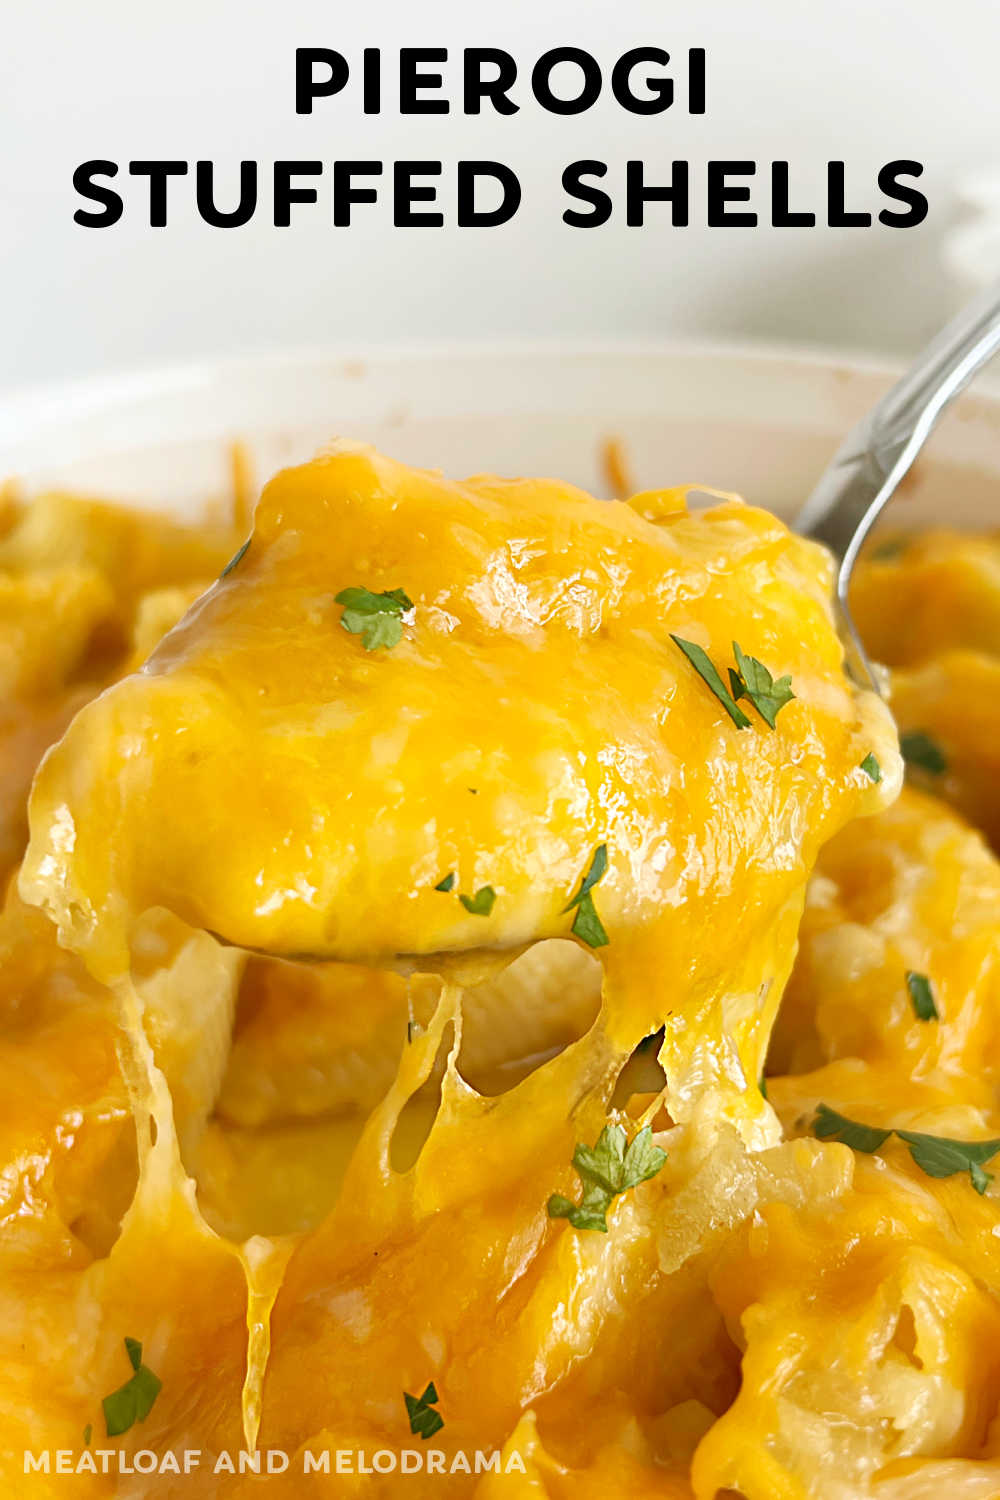 Easy Pierogi Stuffed Shells are baked pasta shells filled with cheesy mashed potatoes topped with sauteed onions and lots of cheddar cheese. This lazy pierogi casserole makes a delicious dinner the whole family will love! via @meamel